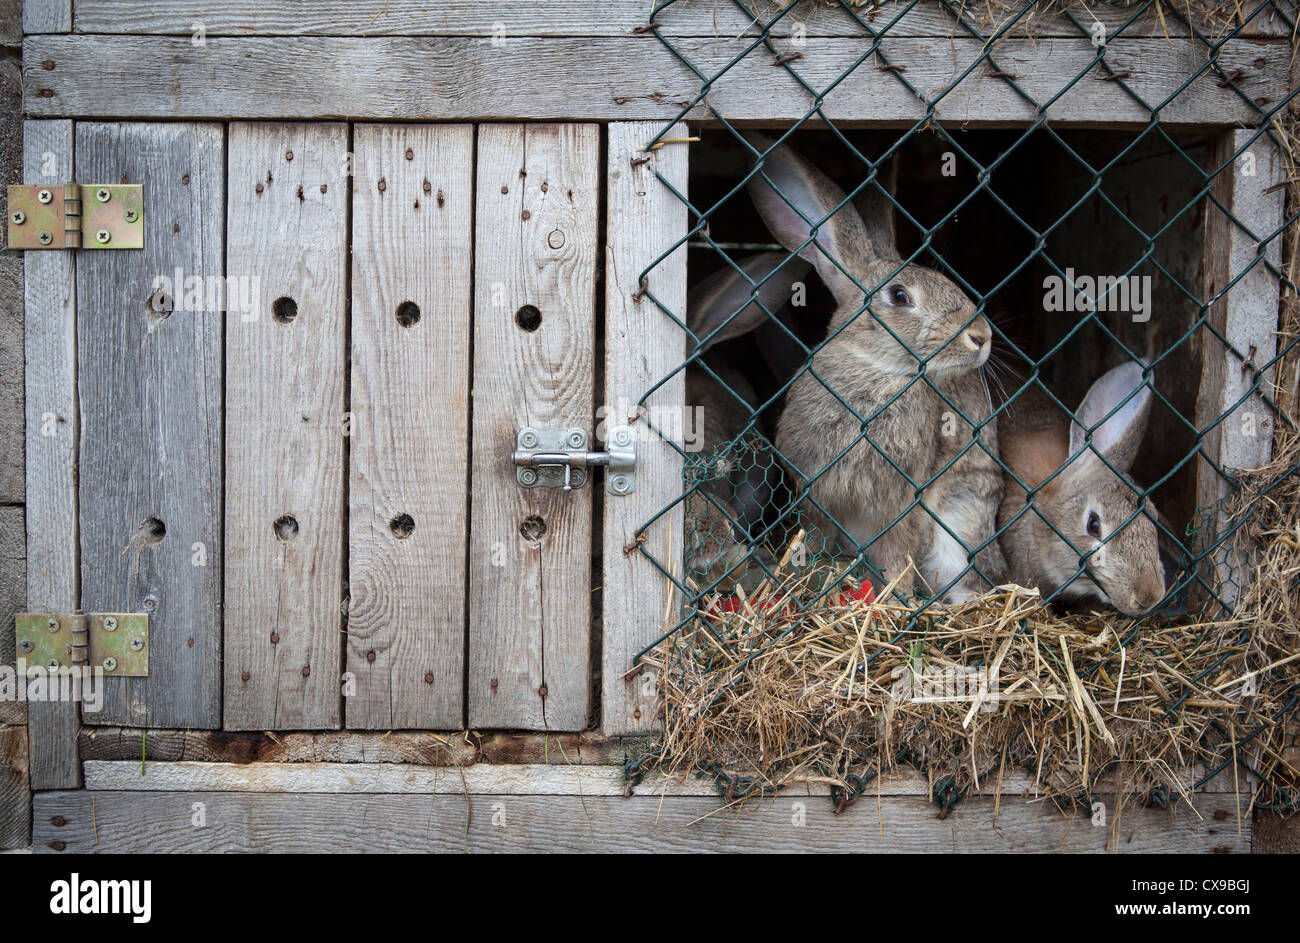 Rabbits in a wooden hutch. Stock Photo